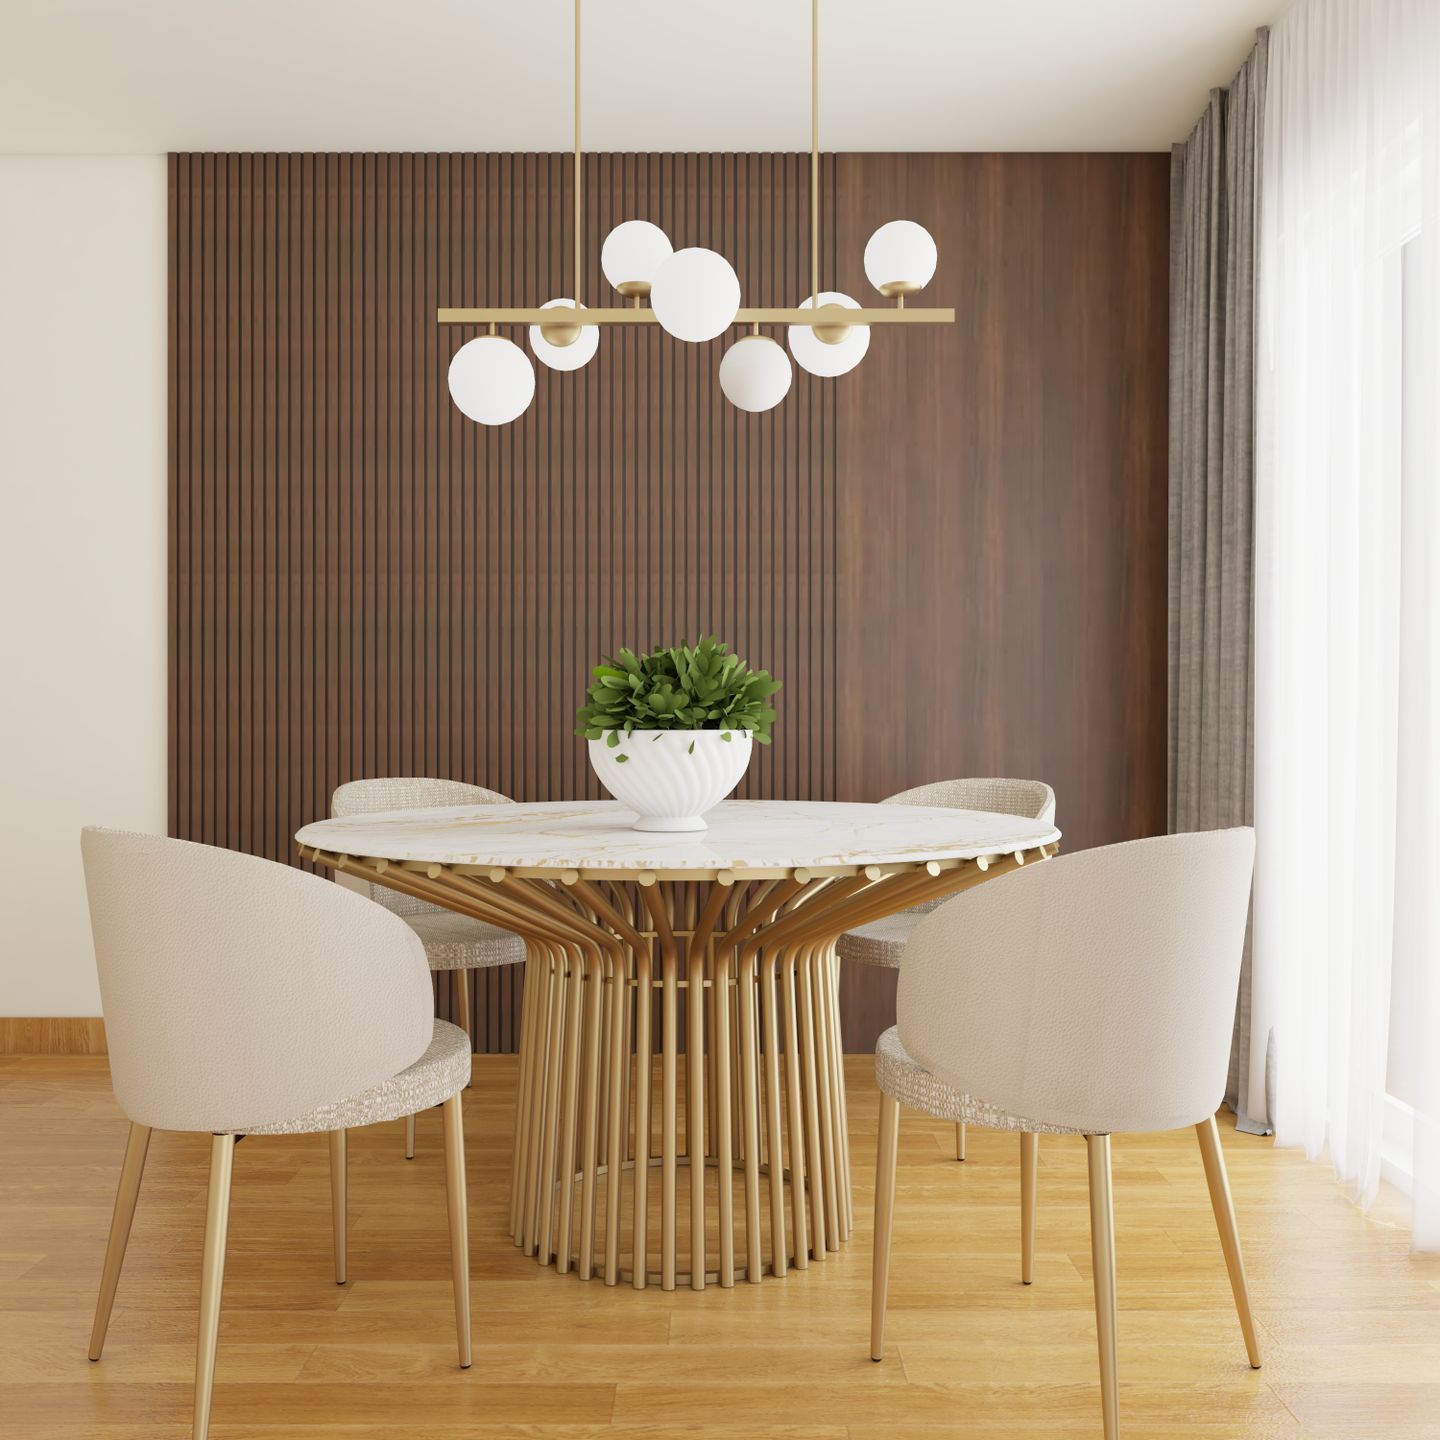 Contemporary Convenient Dining Room Design With Wooden Flooring - Livspace